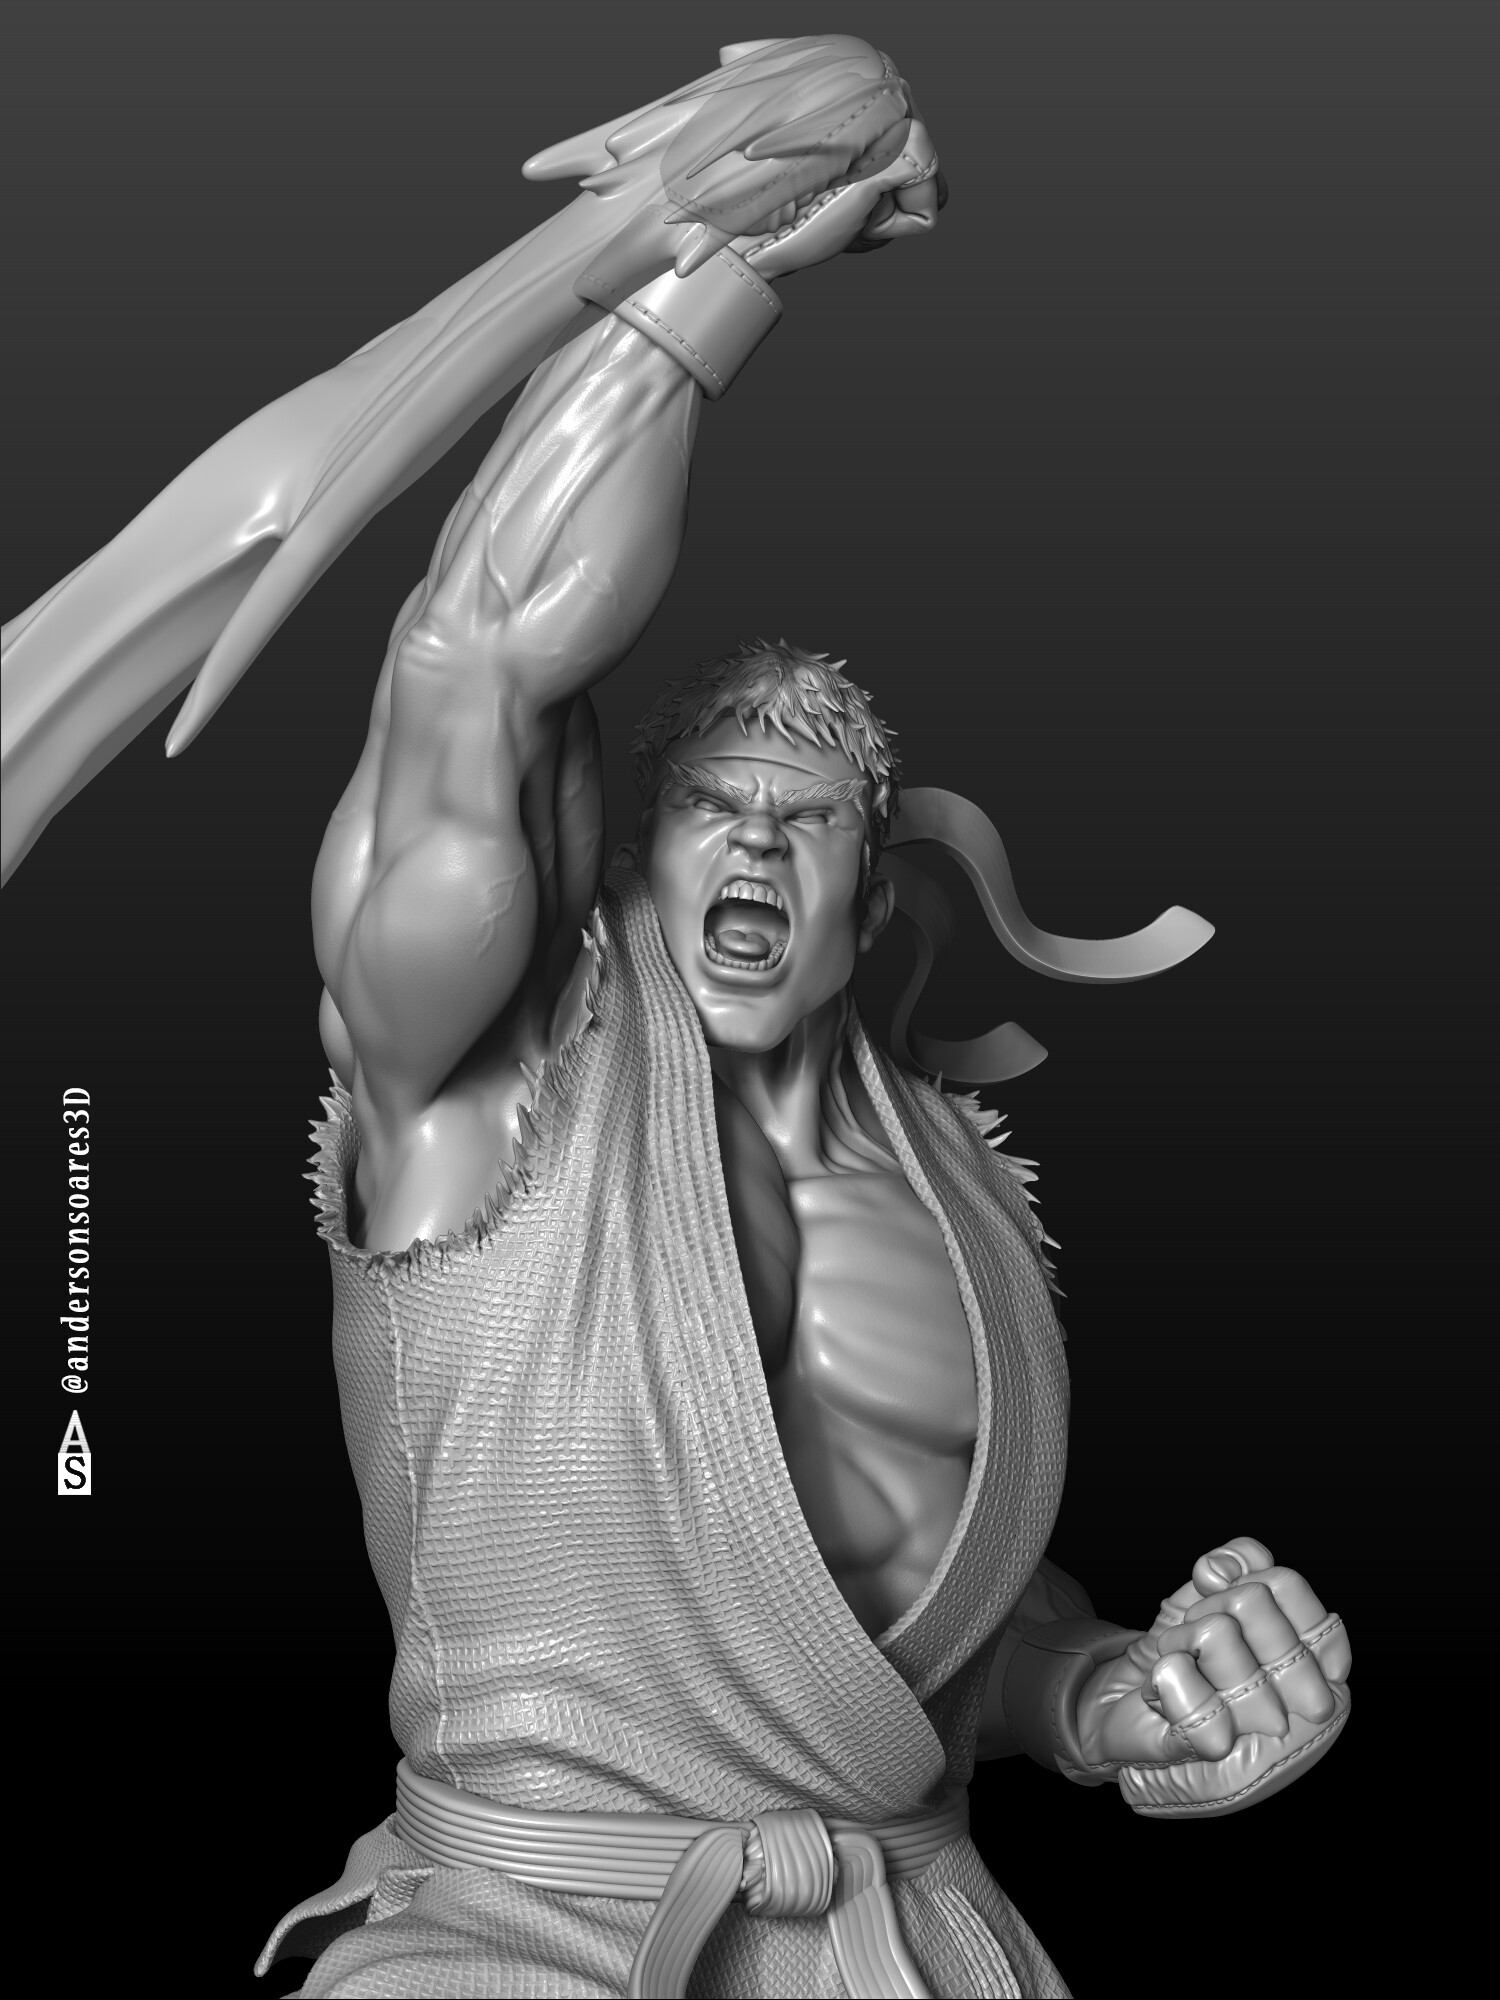 Ryu (Street Fighter) by chungtic, Character Art, 3D